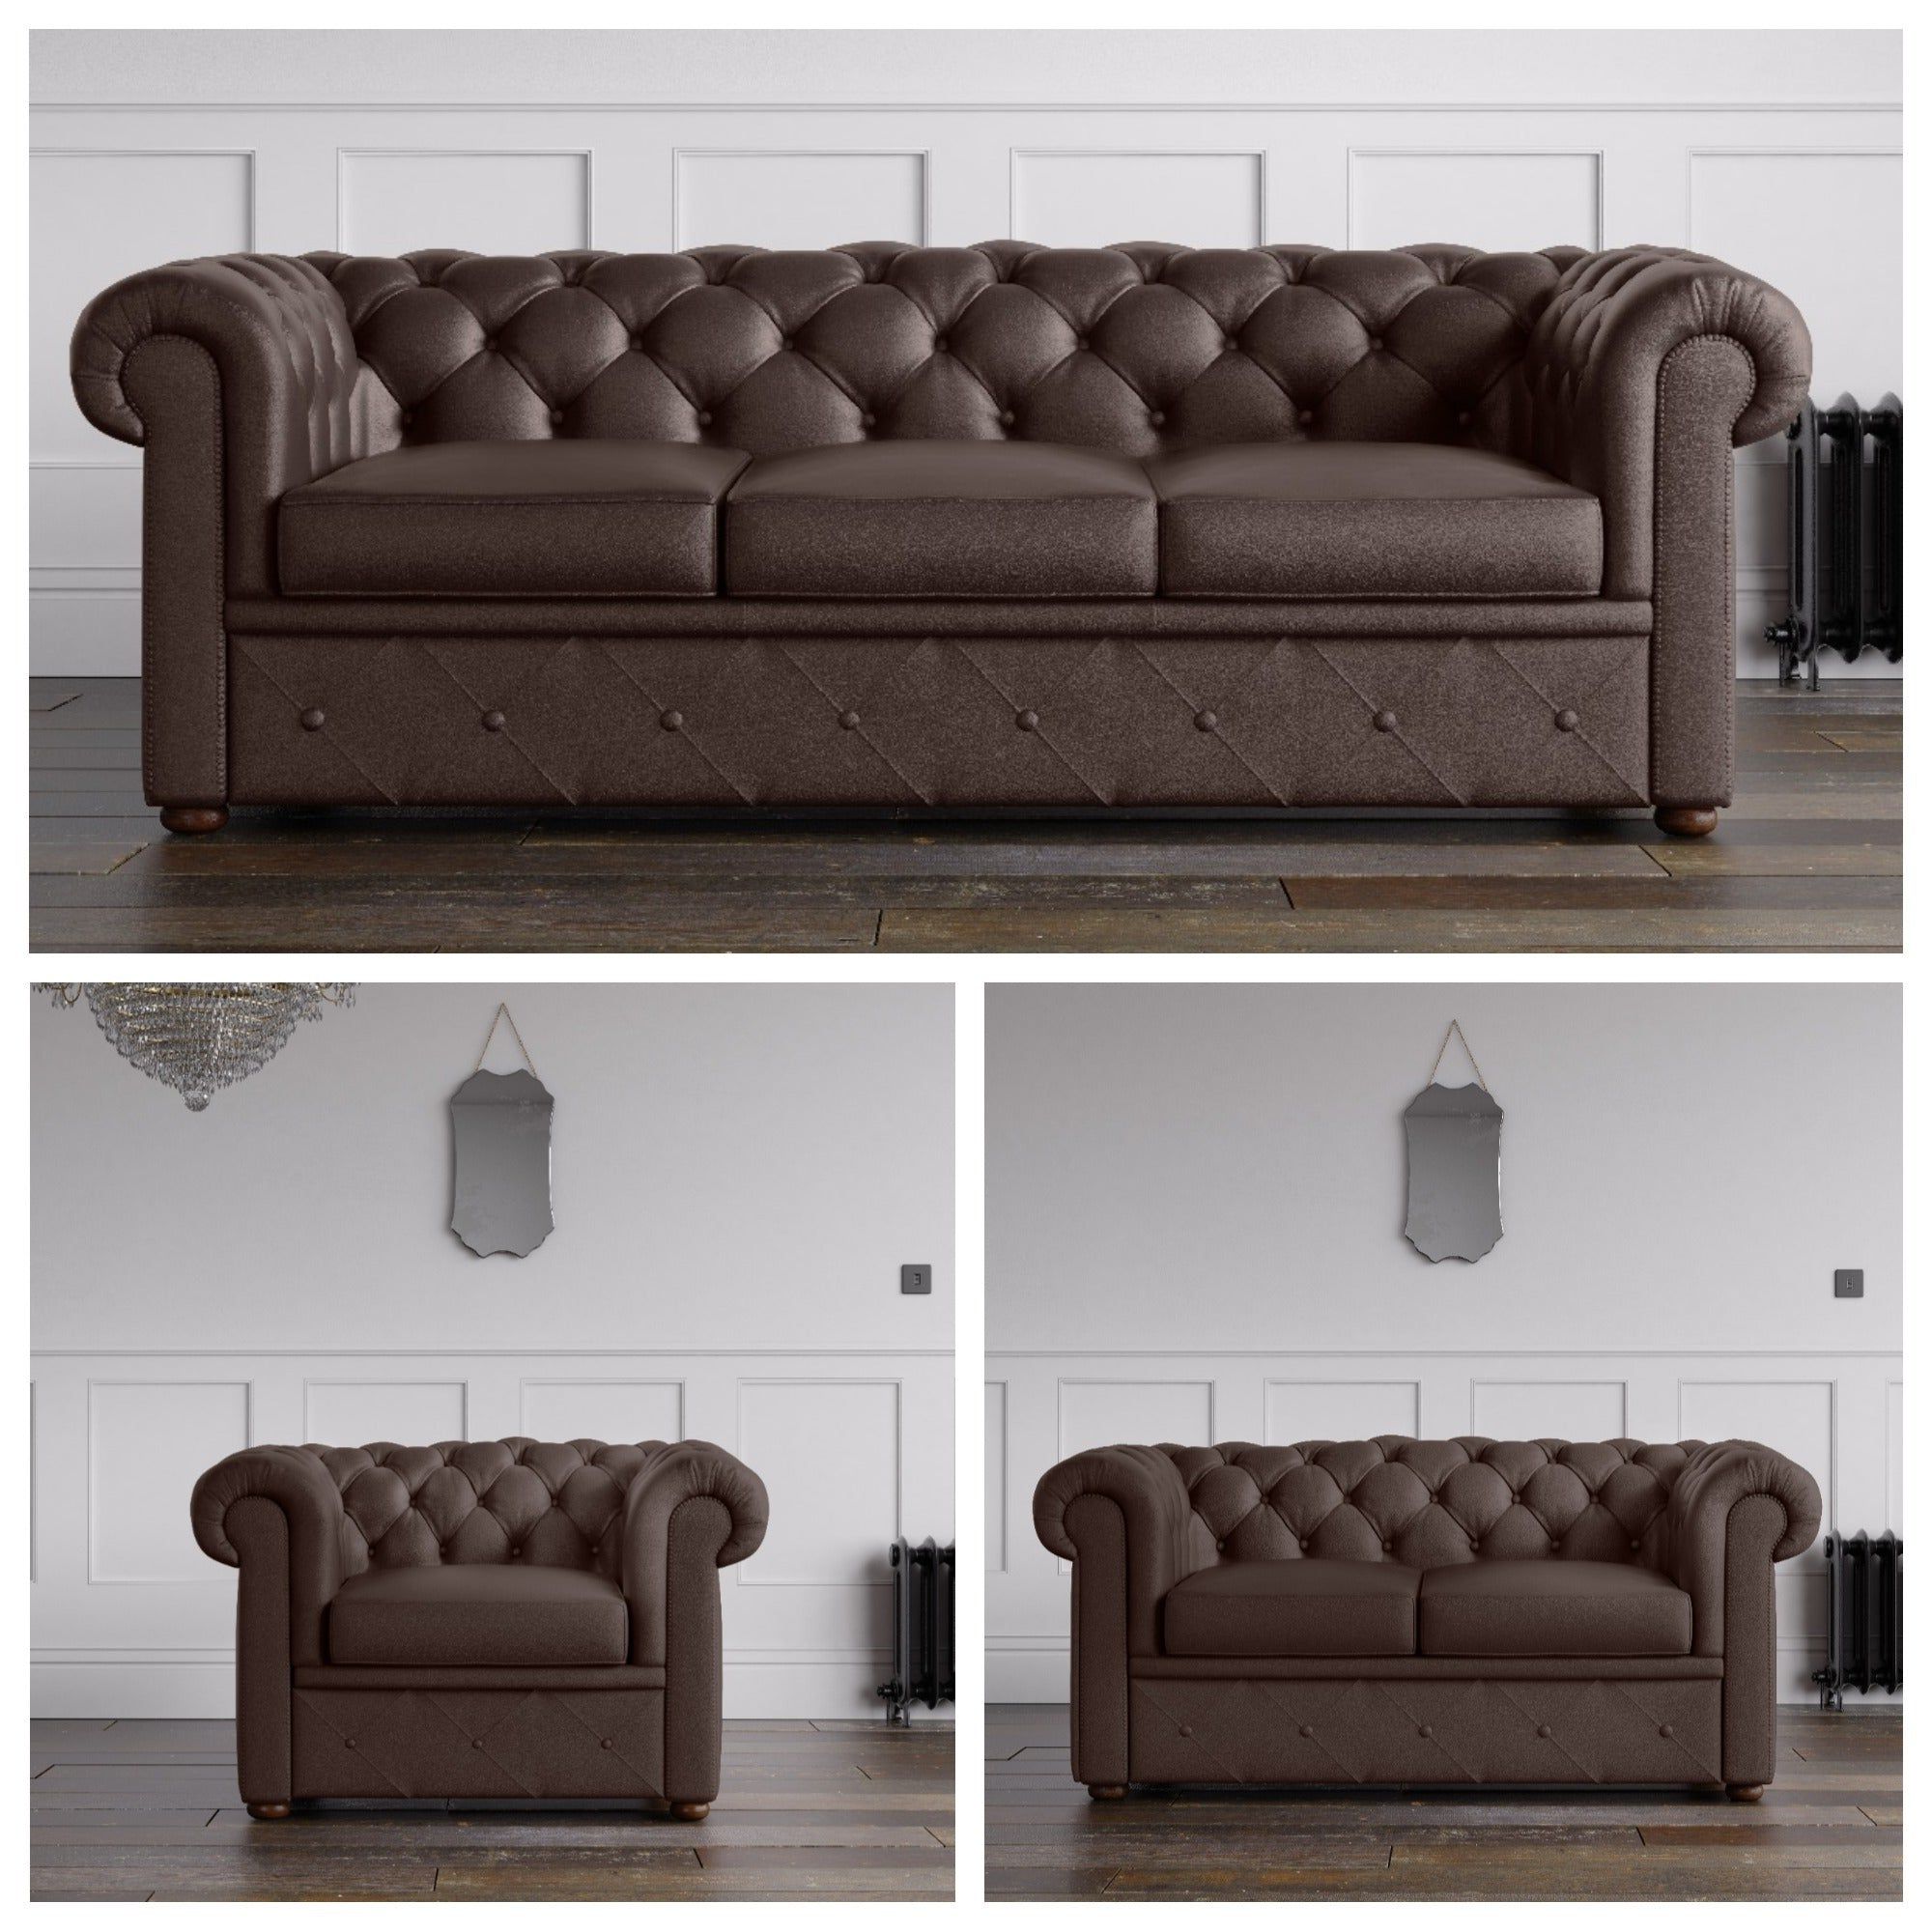 Featured Photo of 20 Inspirations Faux Leather Sofas in Chocolate Brown